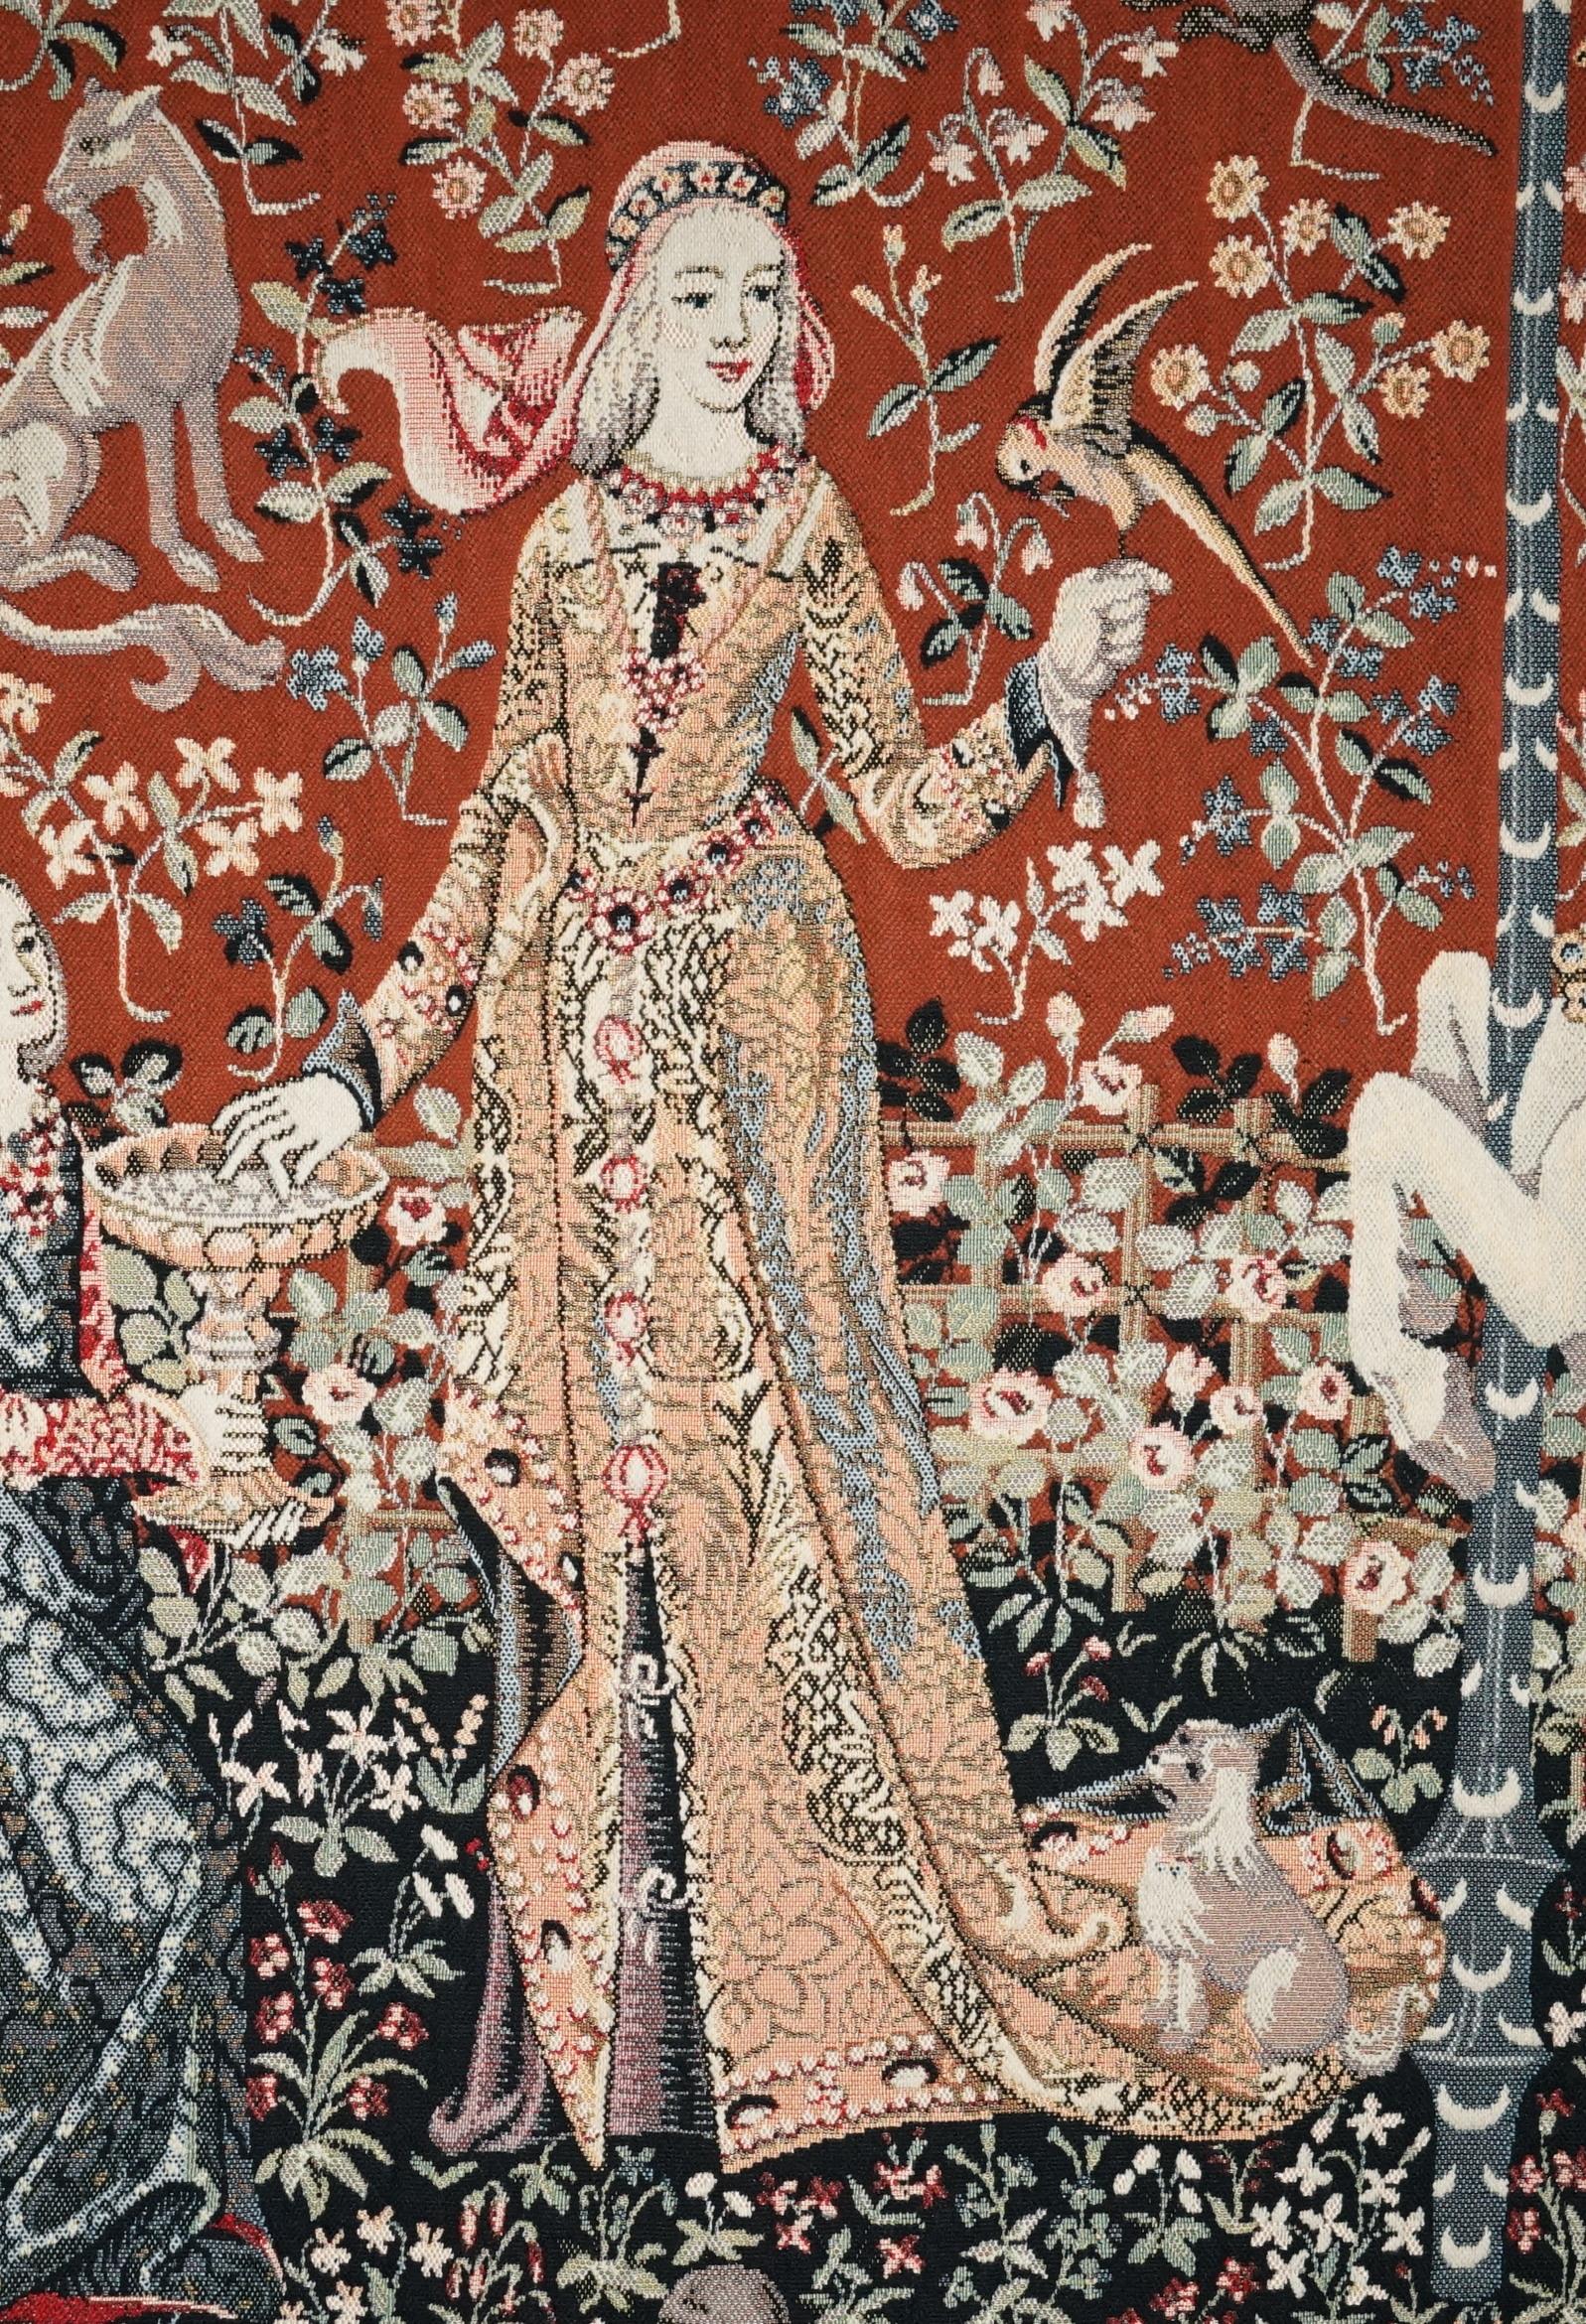 Early 20th Century ViNTAGE THE LADY AND THE UNICORN LARGE WALL HANGING WOVEN TAPESTRY 216CM X 189CM For Sale